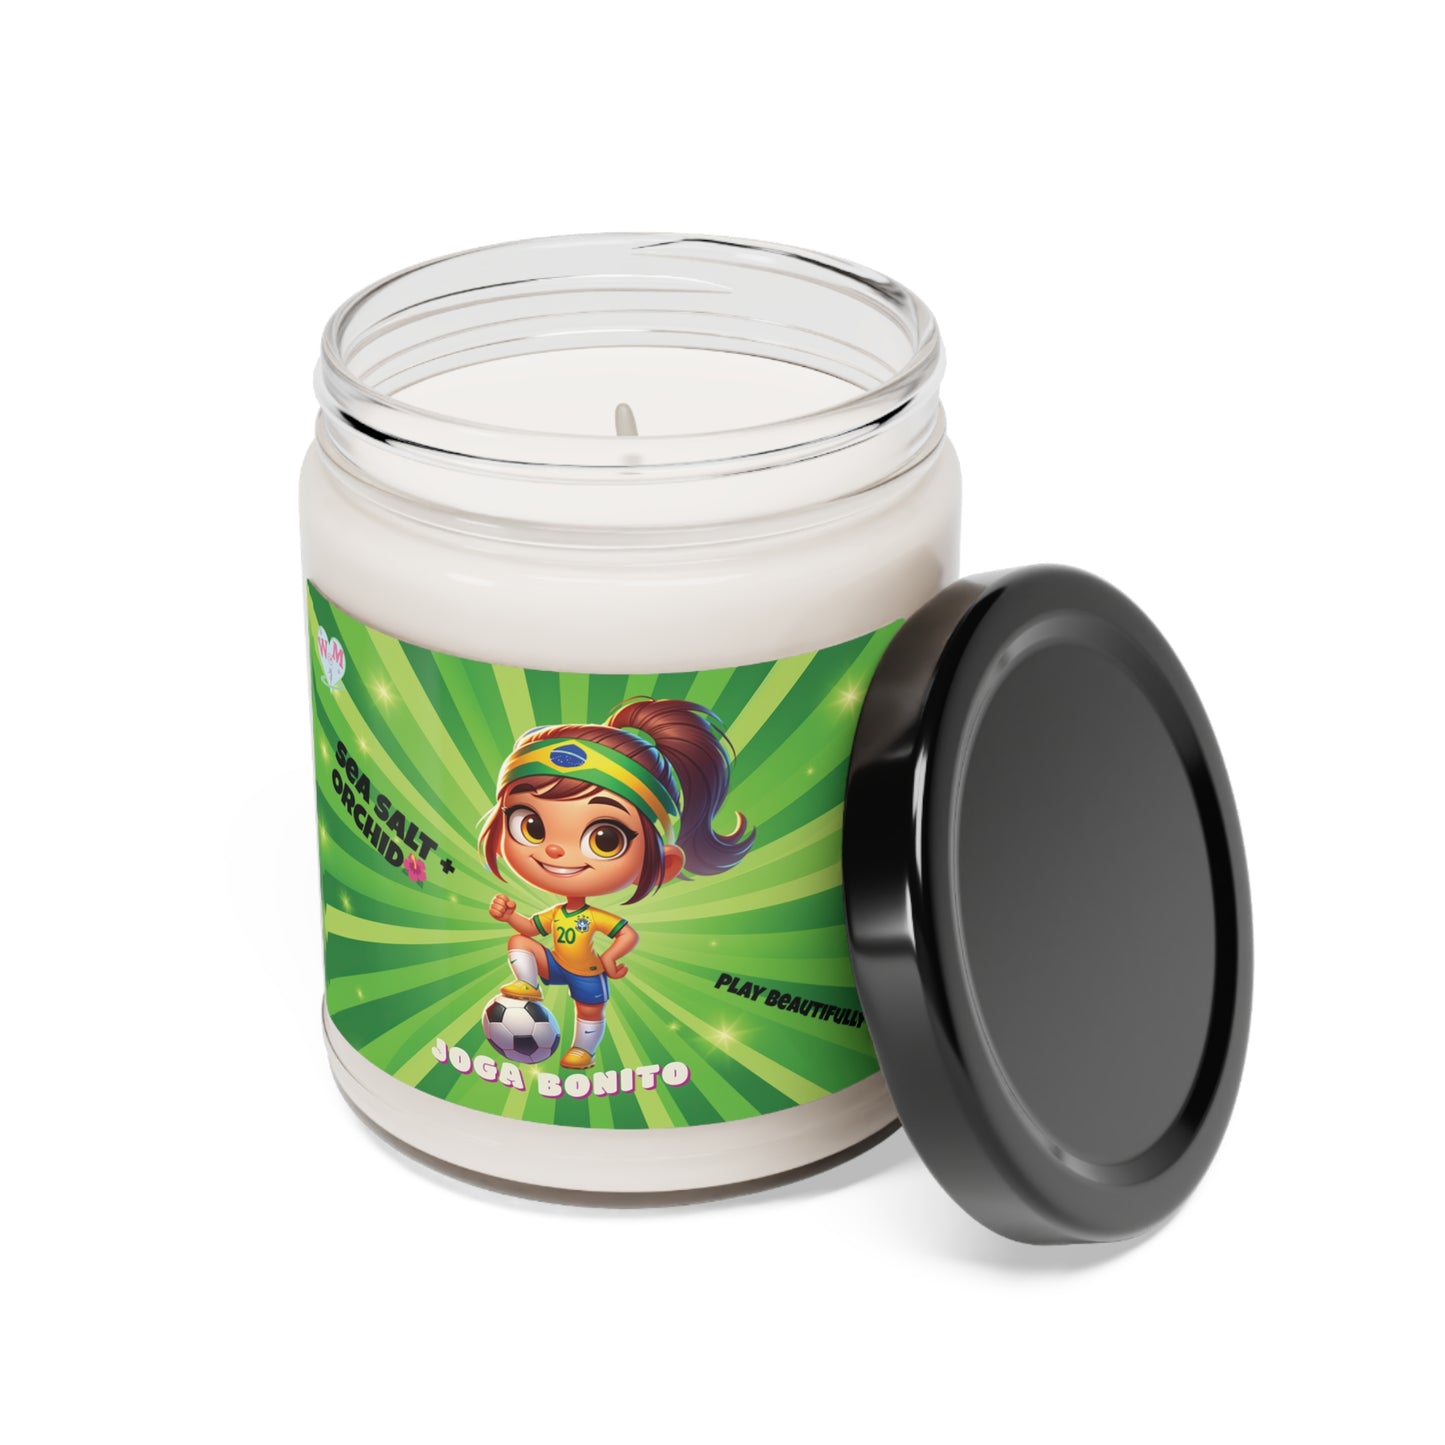 Brazil Soccer Player Sea Salt + Orchid Scented Soy Candle, 9oz